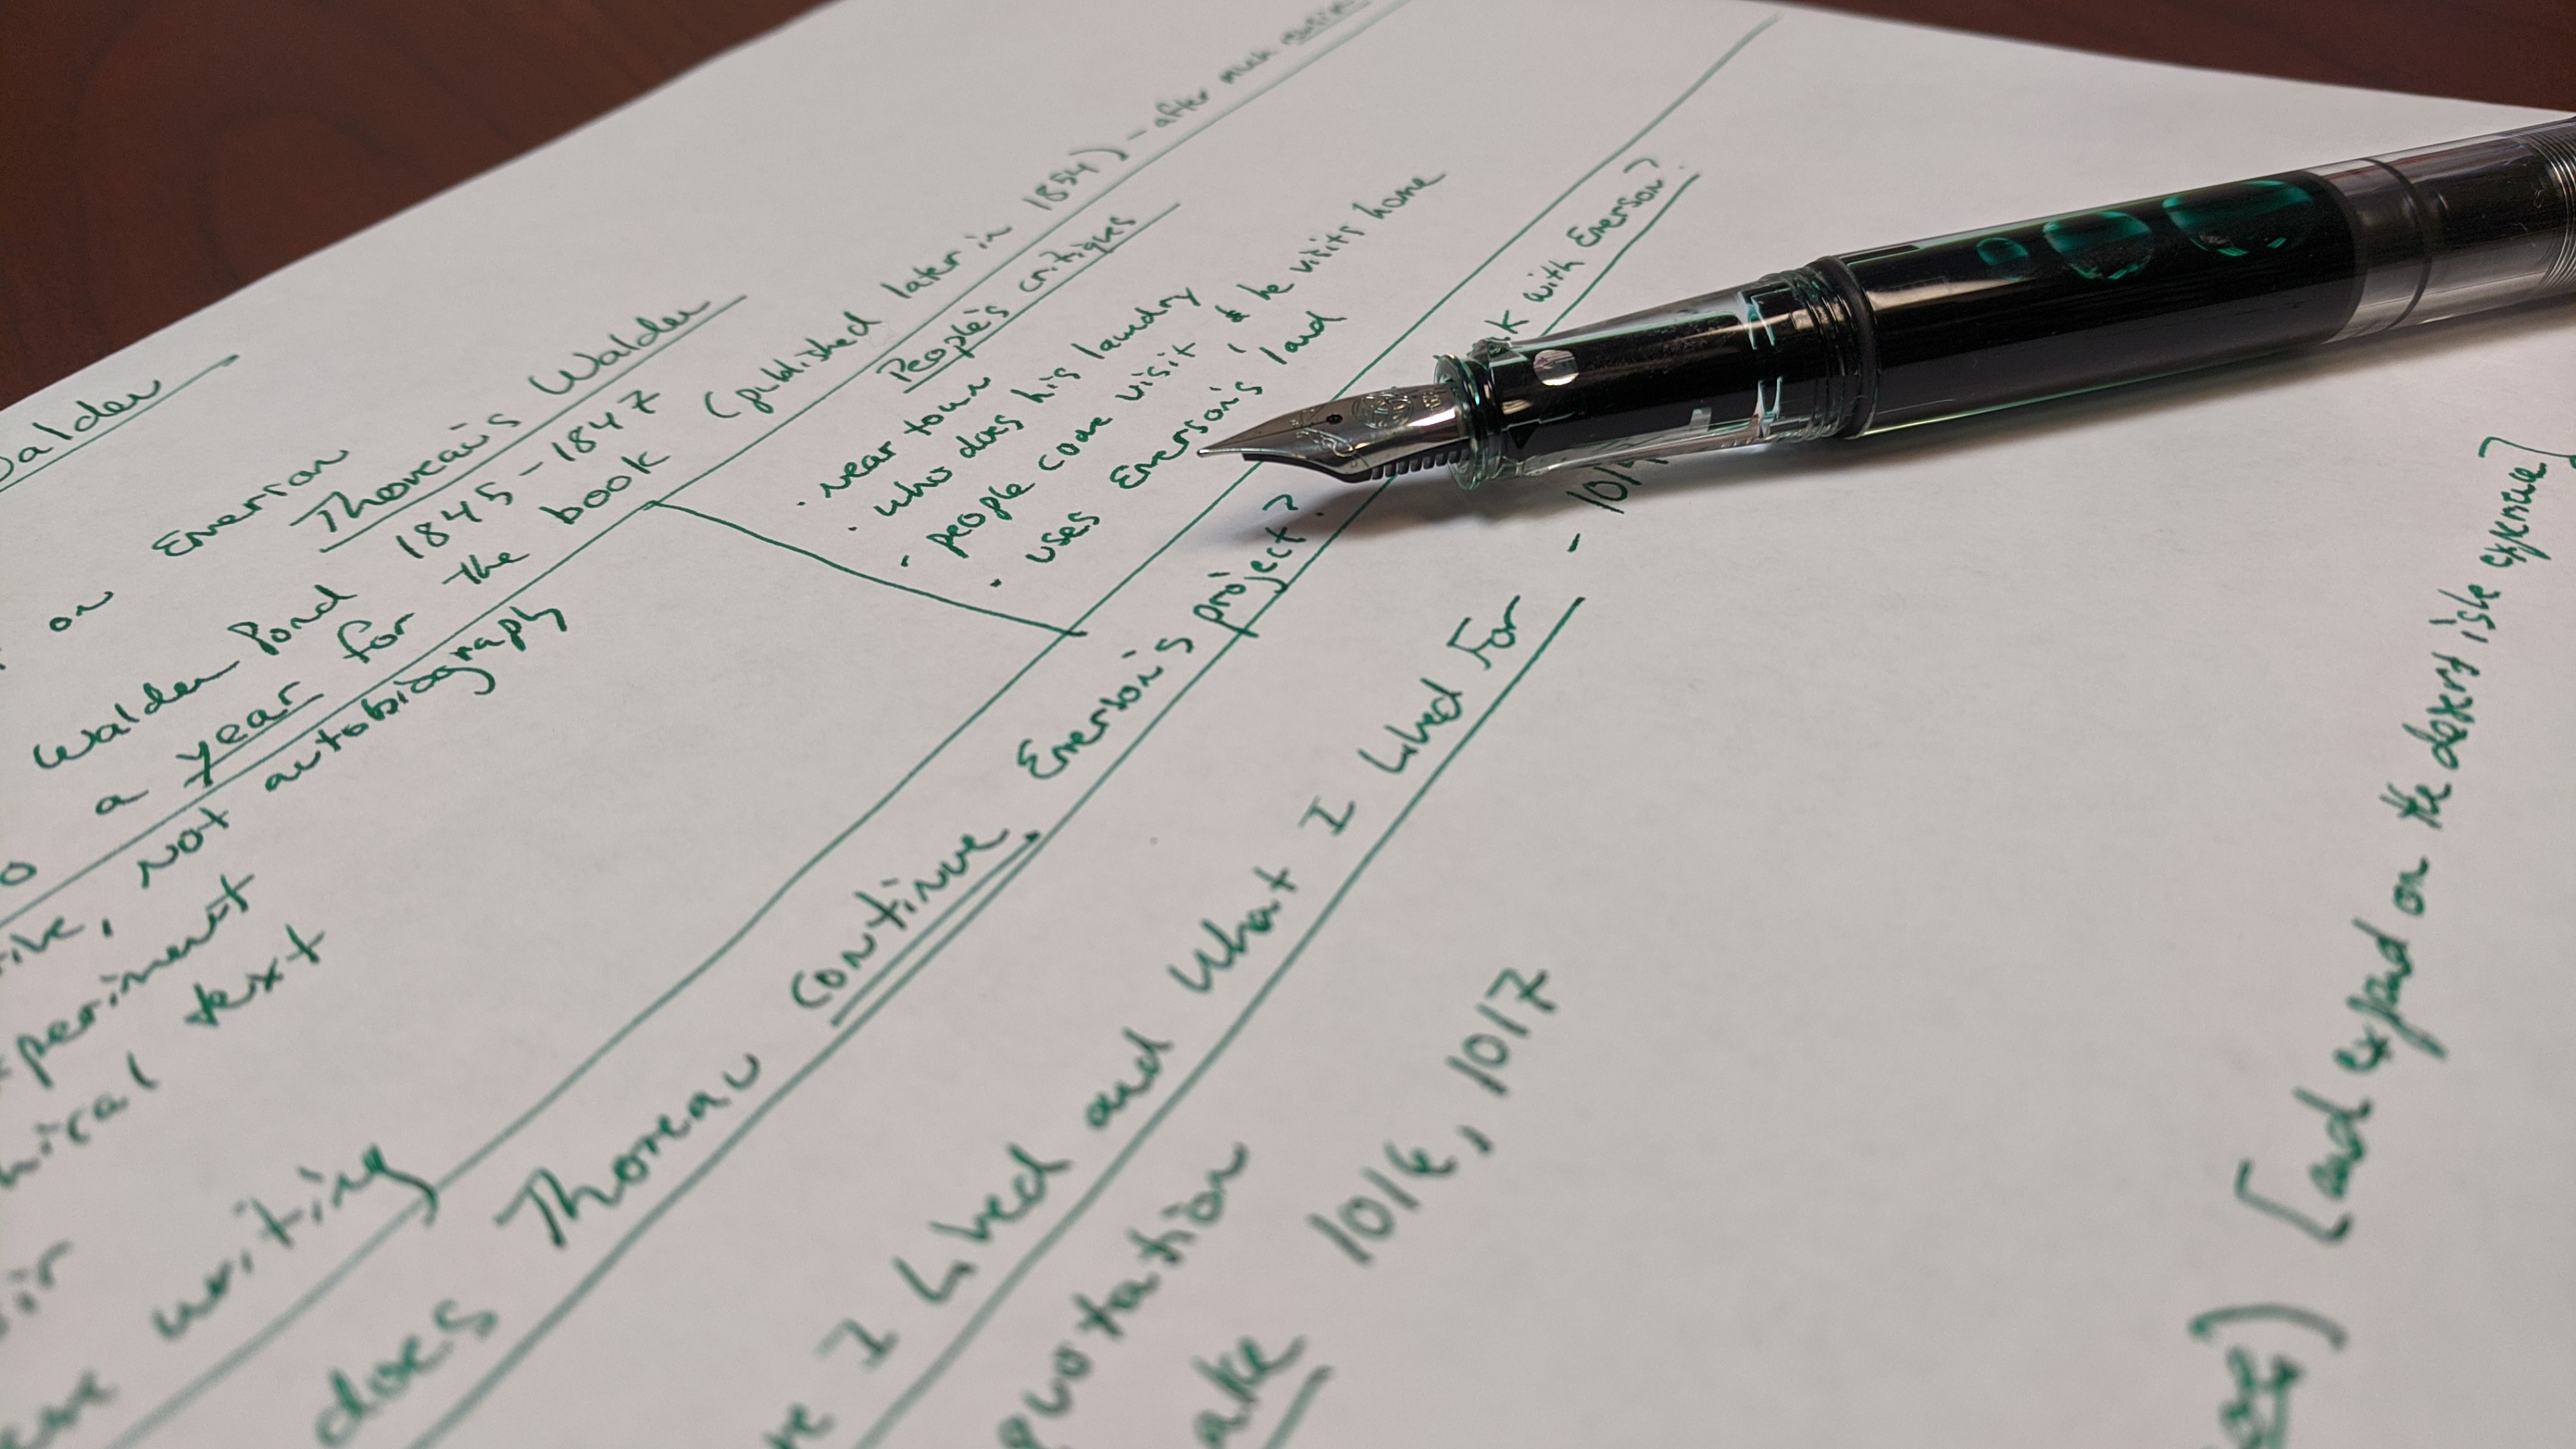 To the point: Fountain pens, writing experience  highlight importance of handwriting